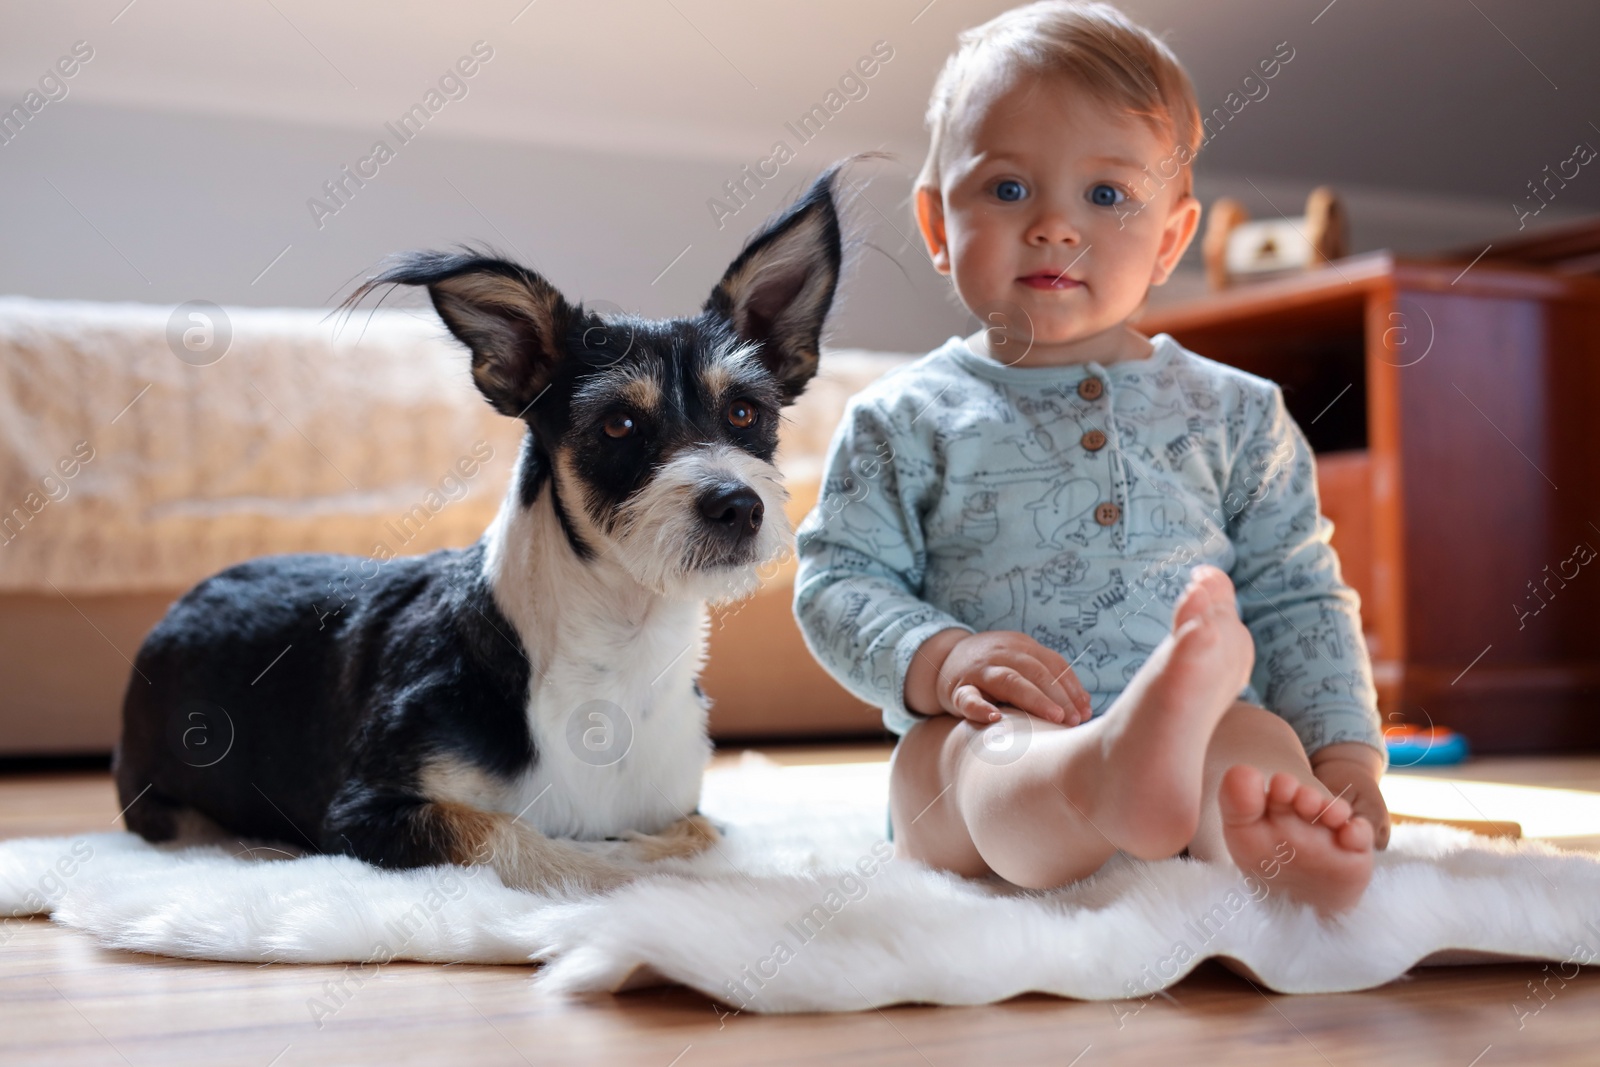 Photo of Adorable baby and cute dog on faux fur rug at home